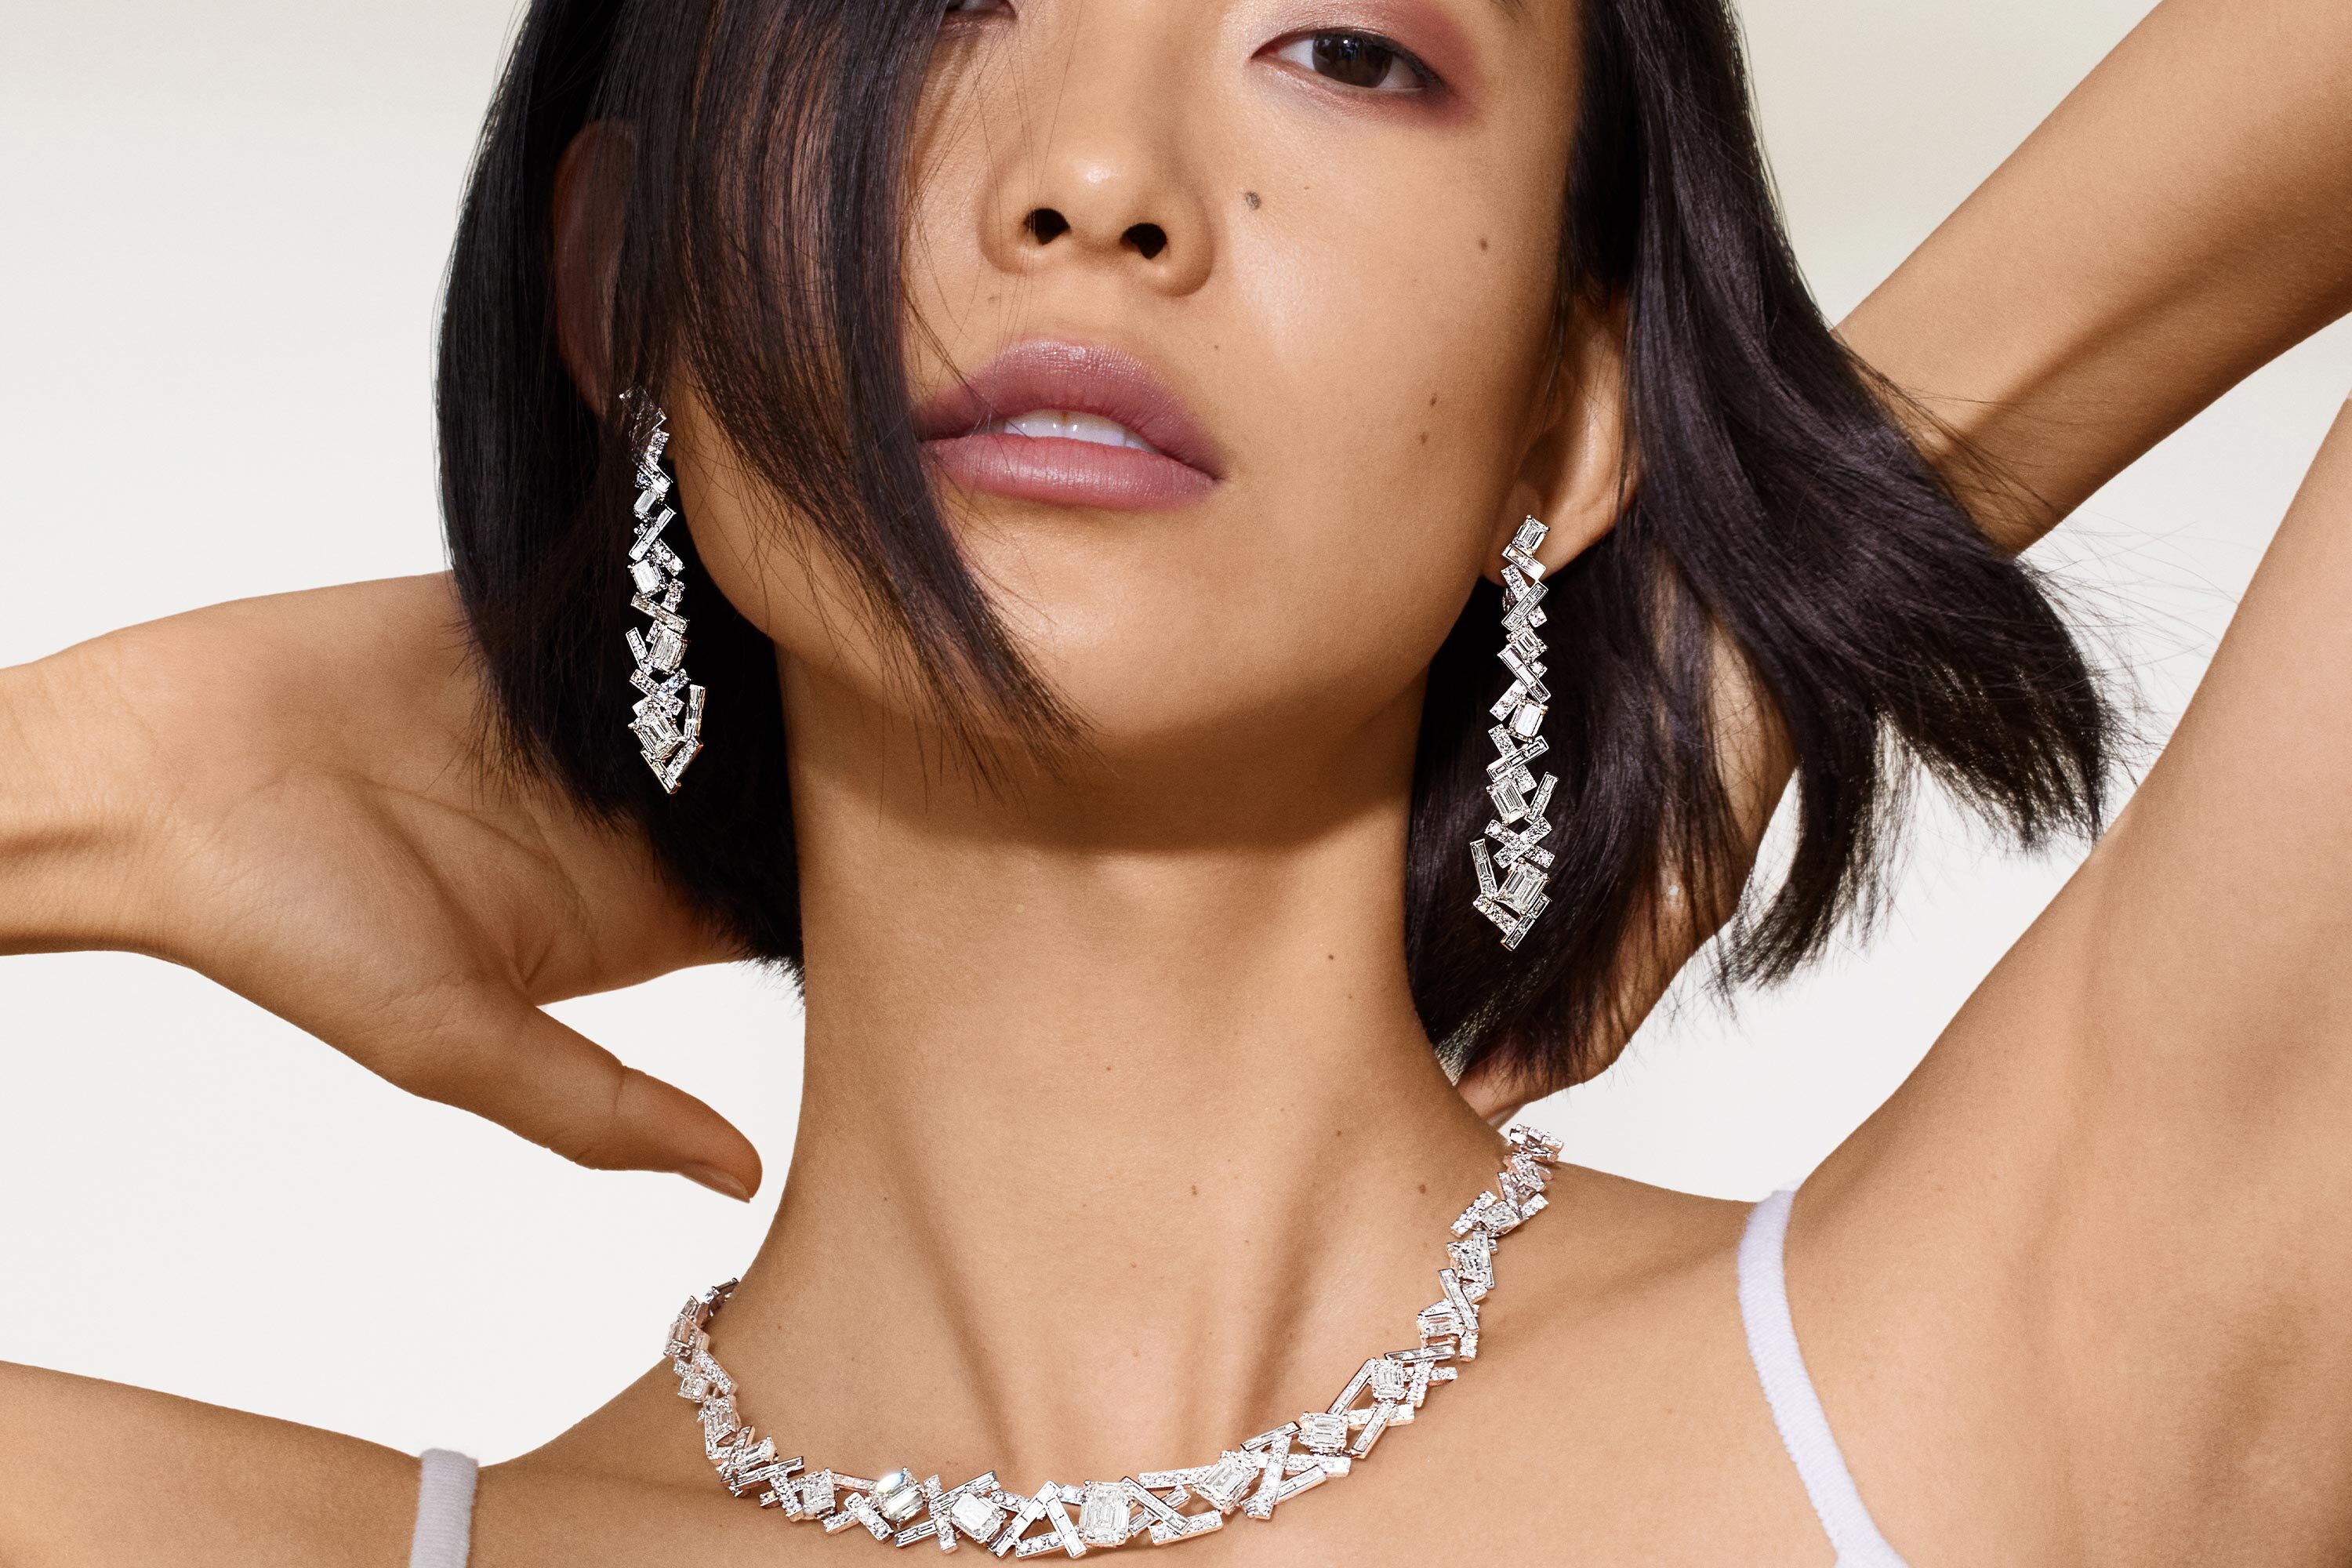 Model wears Threads Diamond high jewellery from the Graff jewellery collection